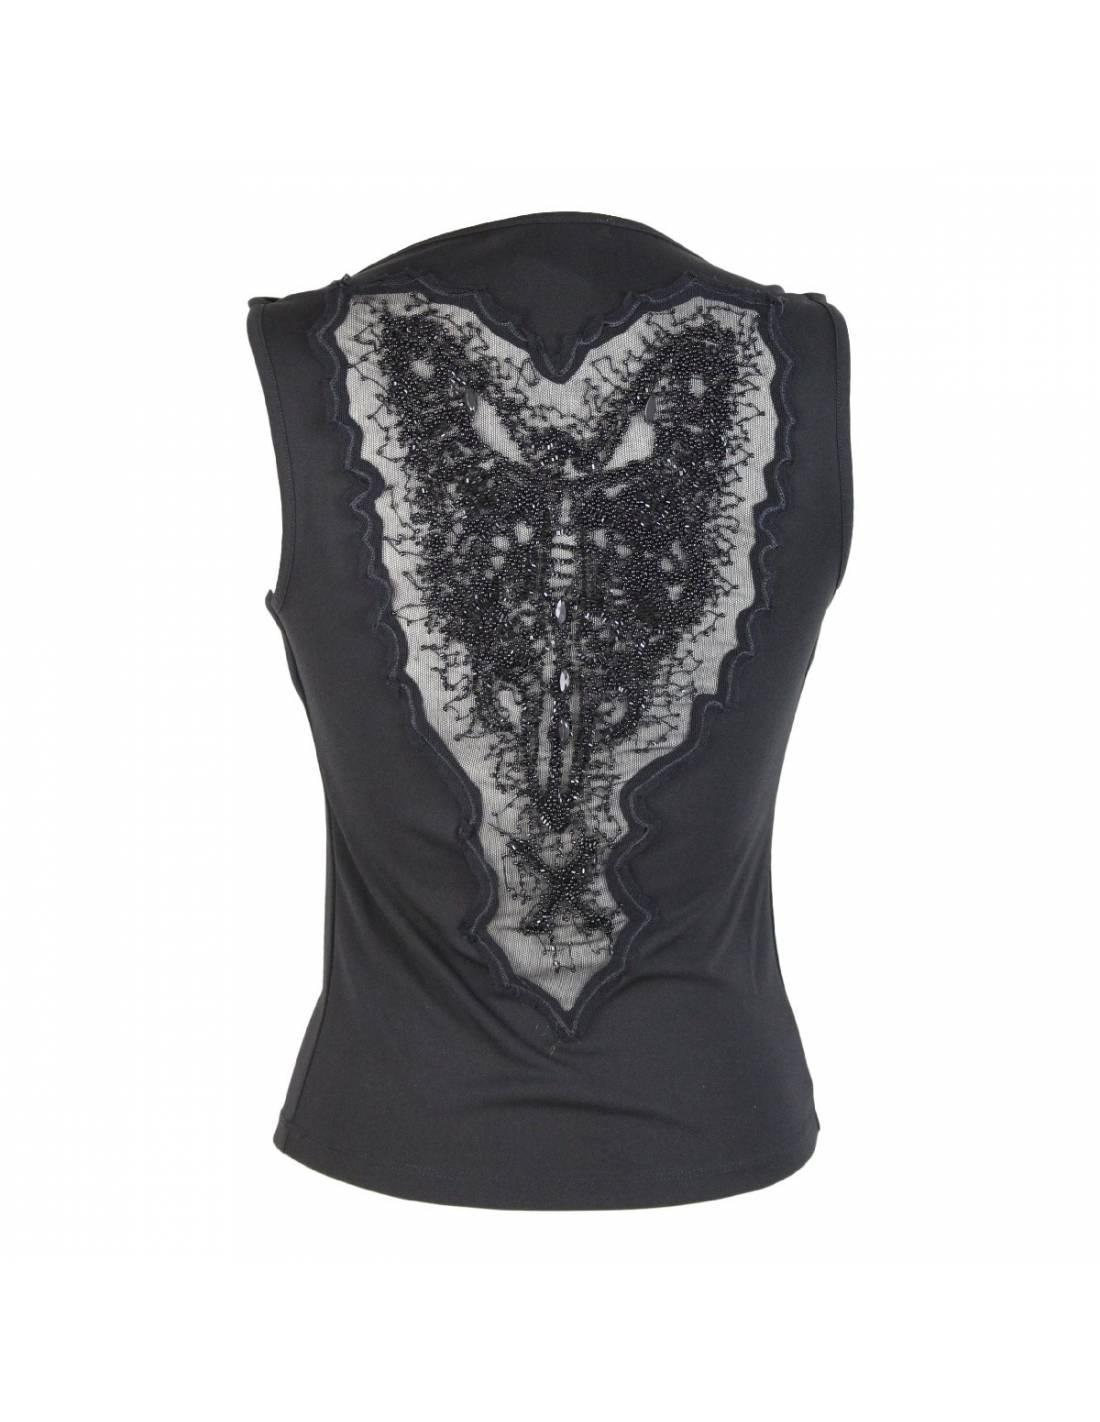 John Richmond black top, worked with beads all over the shoulder, design depicting a butterfly, the collar is soft on the chest, stretch model, in very good condition.

SIZE 40 IT 6 US 8 UK

Shoulders: 40 cm
Length: 54 cm
Bust / Chest: 45 cm